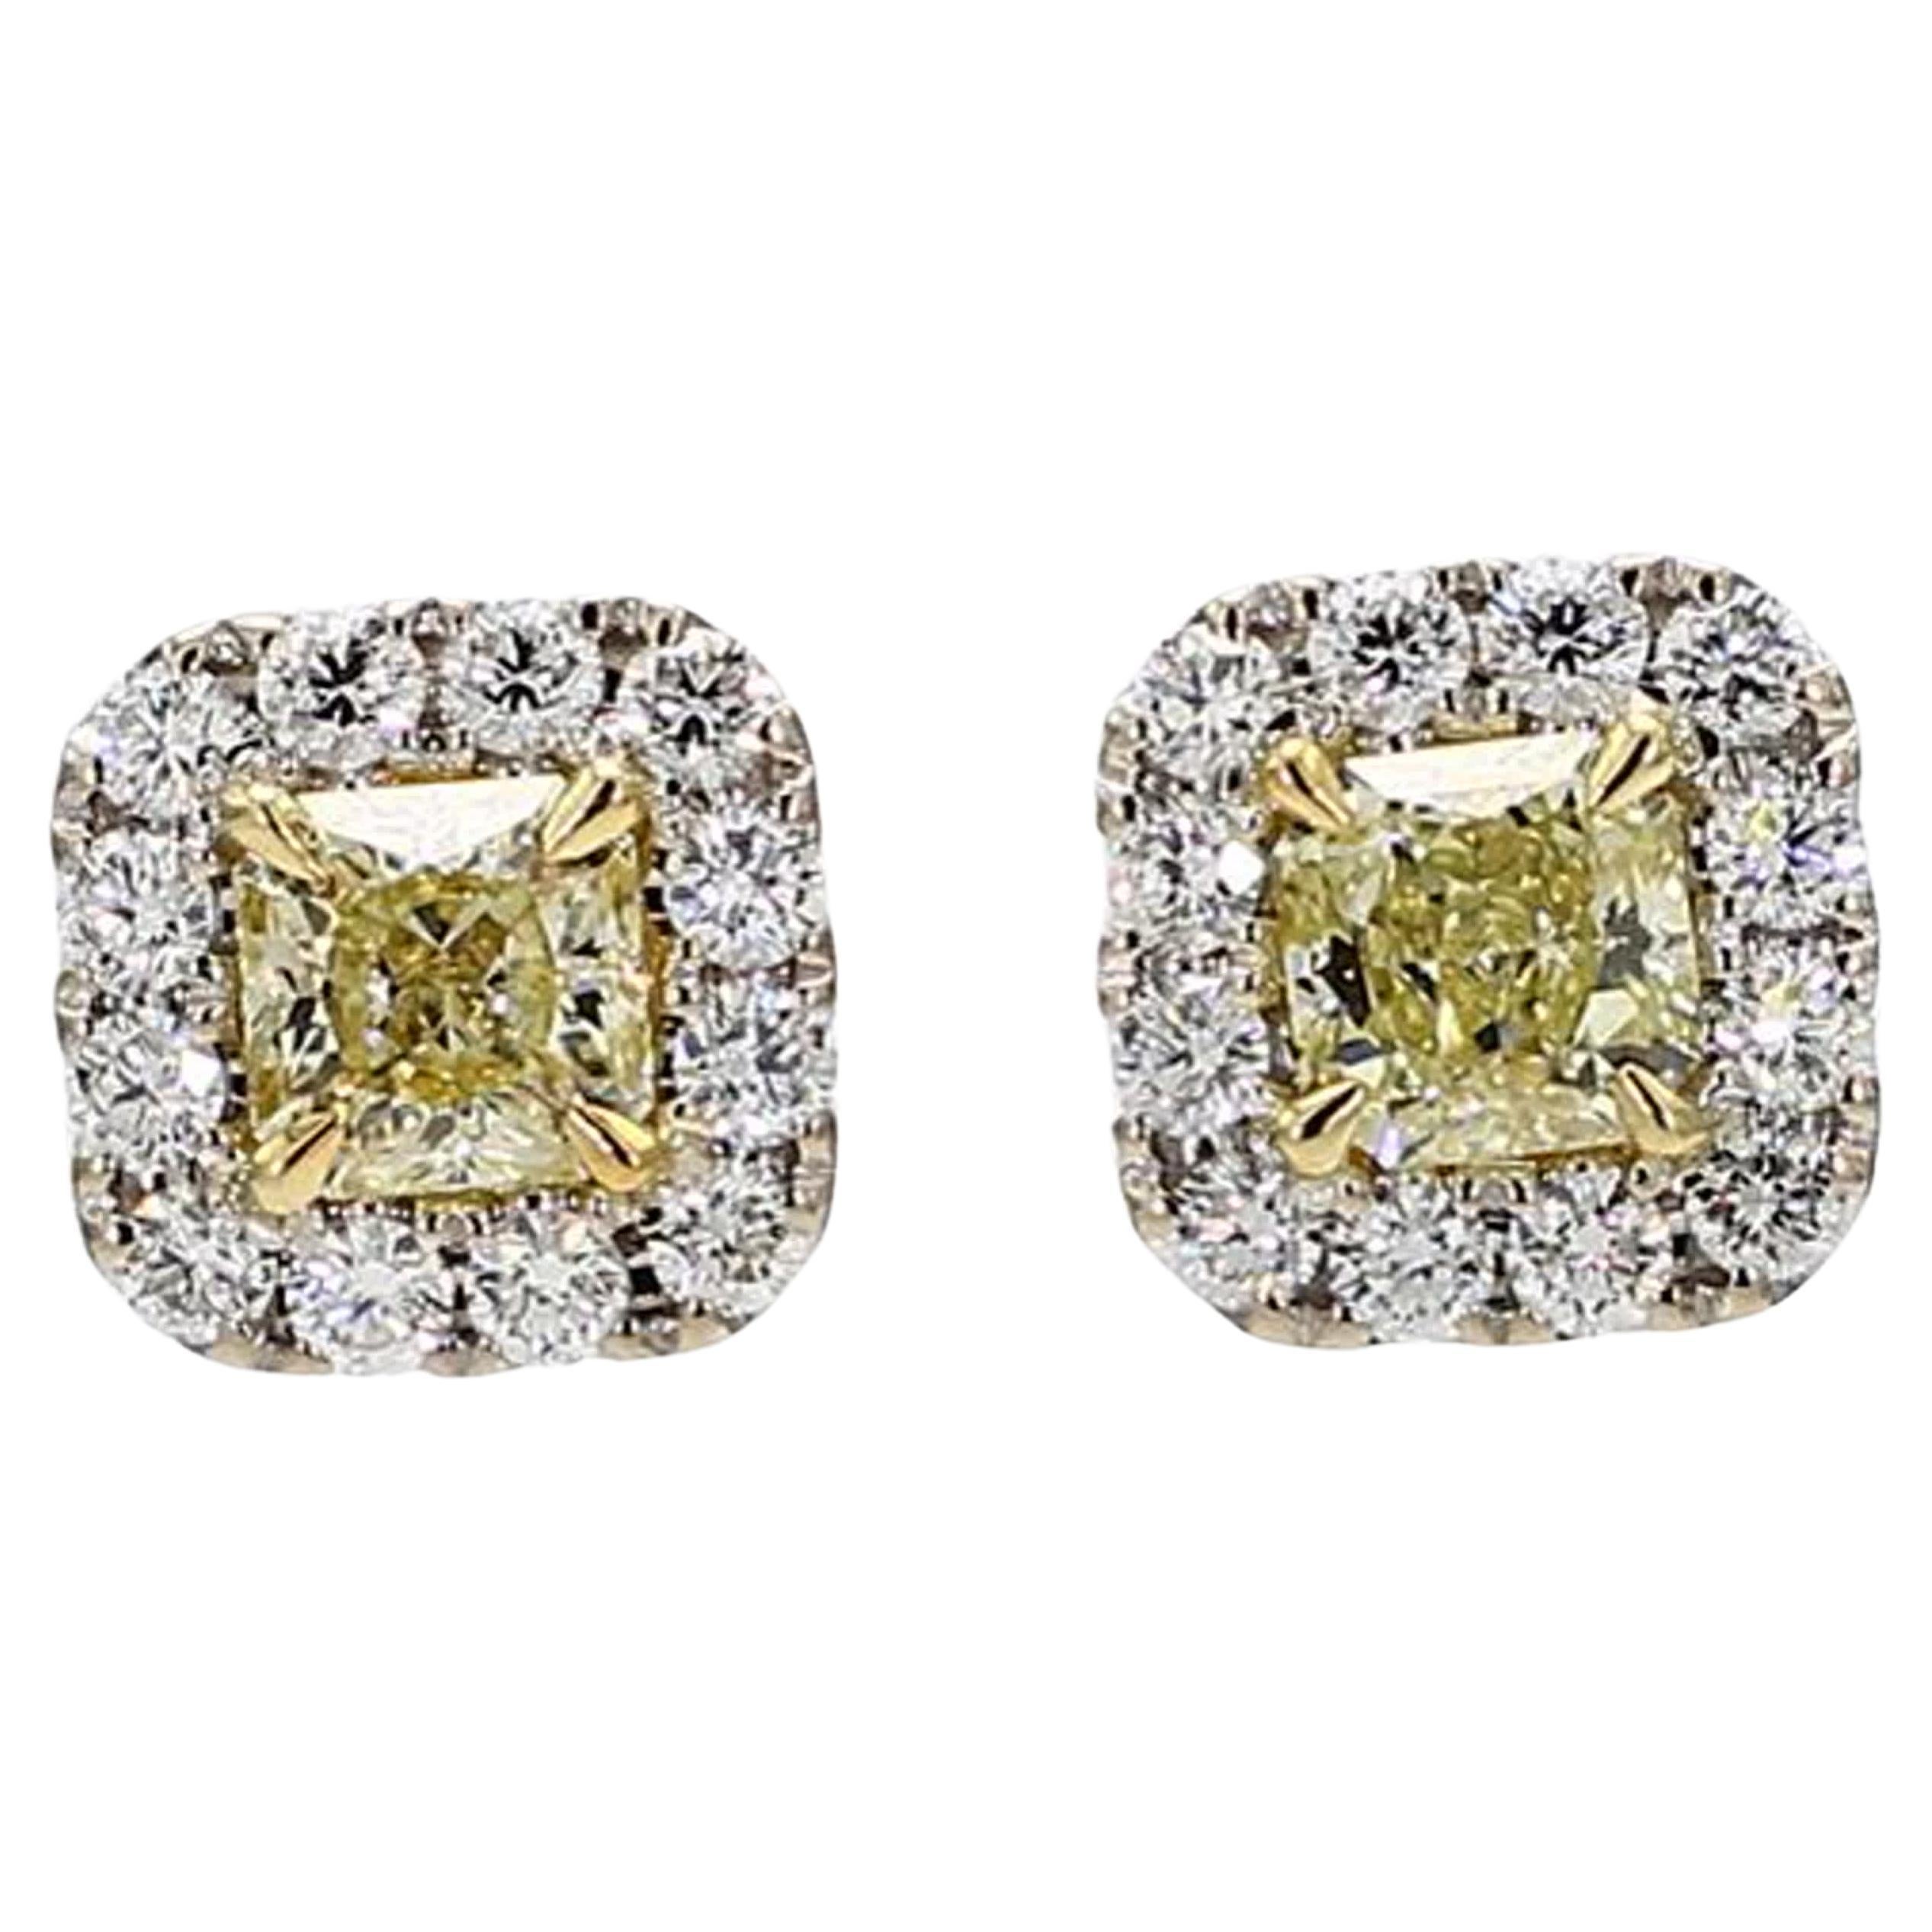 GIA Certified Natural Yellow Radiant Diamond 1.39 Carat TW Gold Stud Earrings